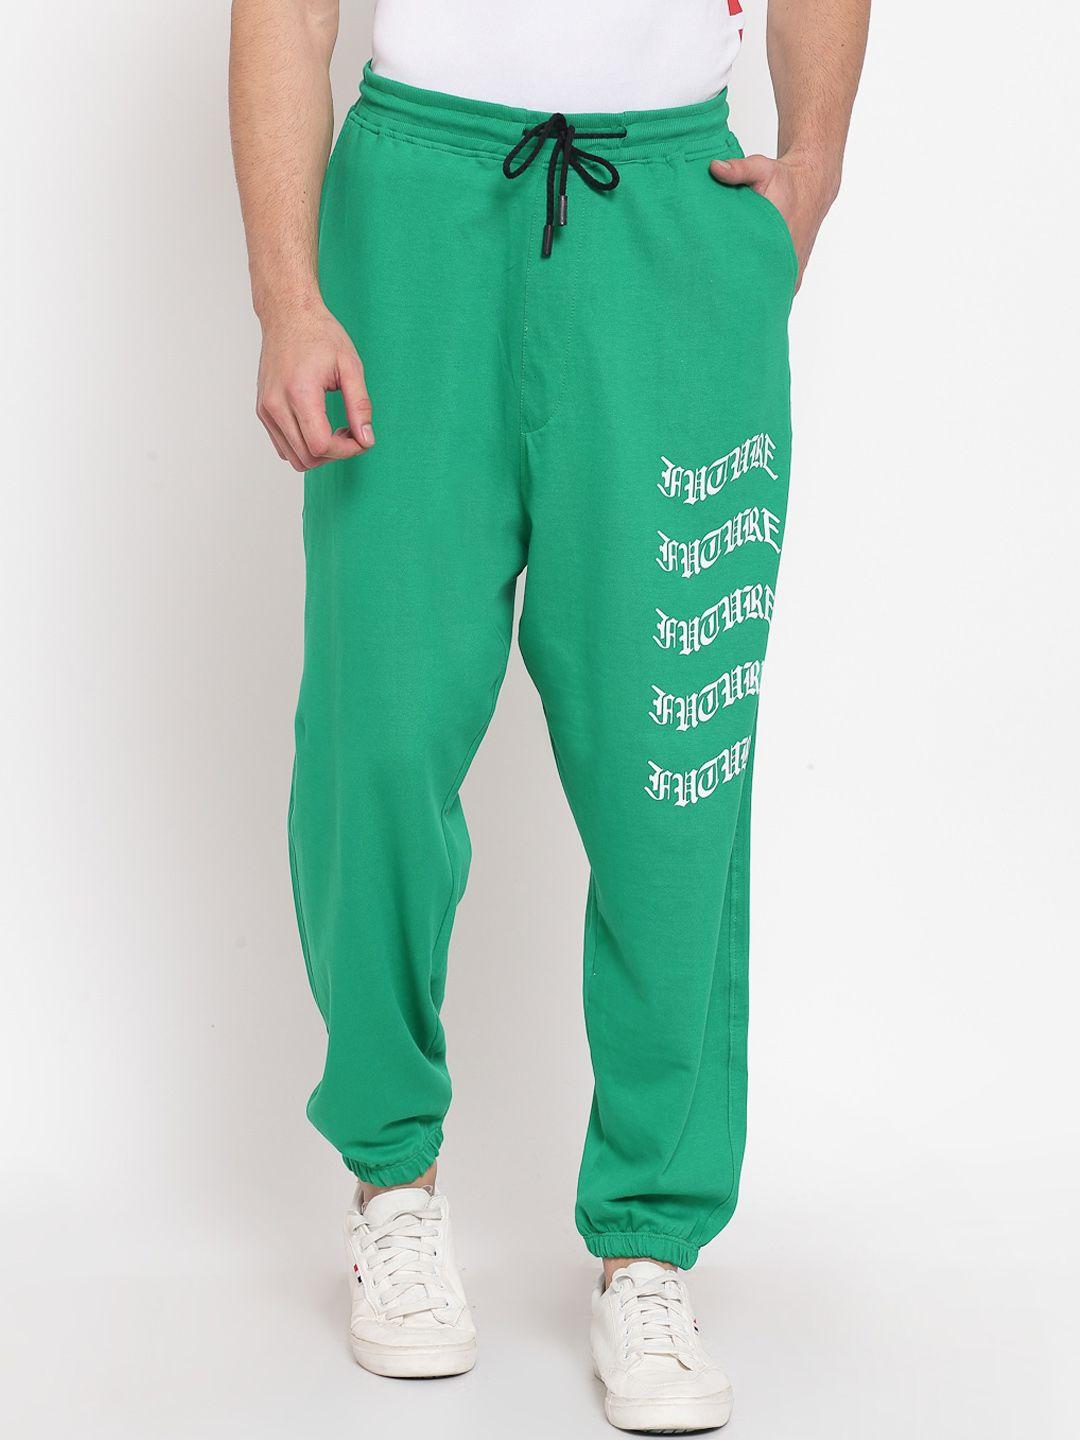 pause-sport-men-green-&-white-printed-loose-fit-antimicrobial-cotton-jogger